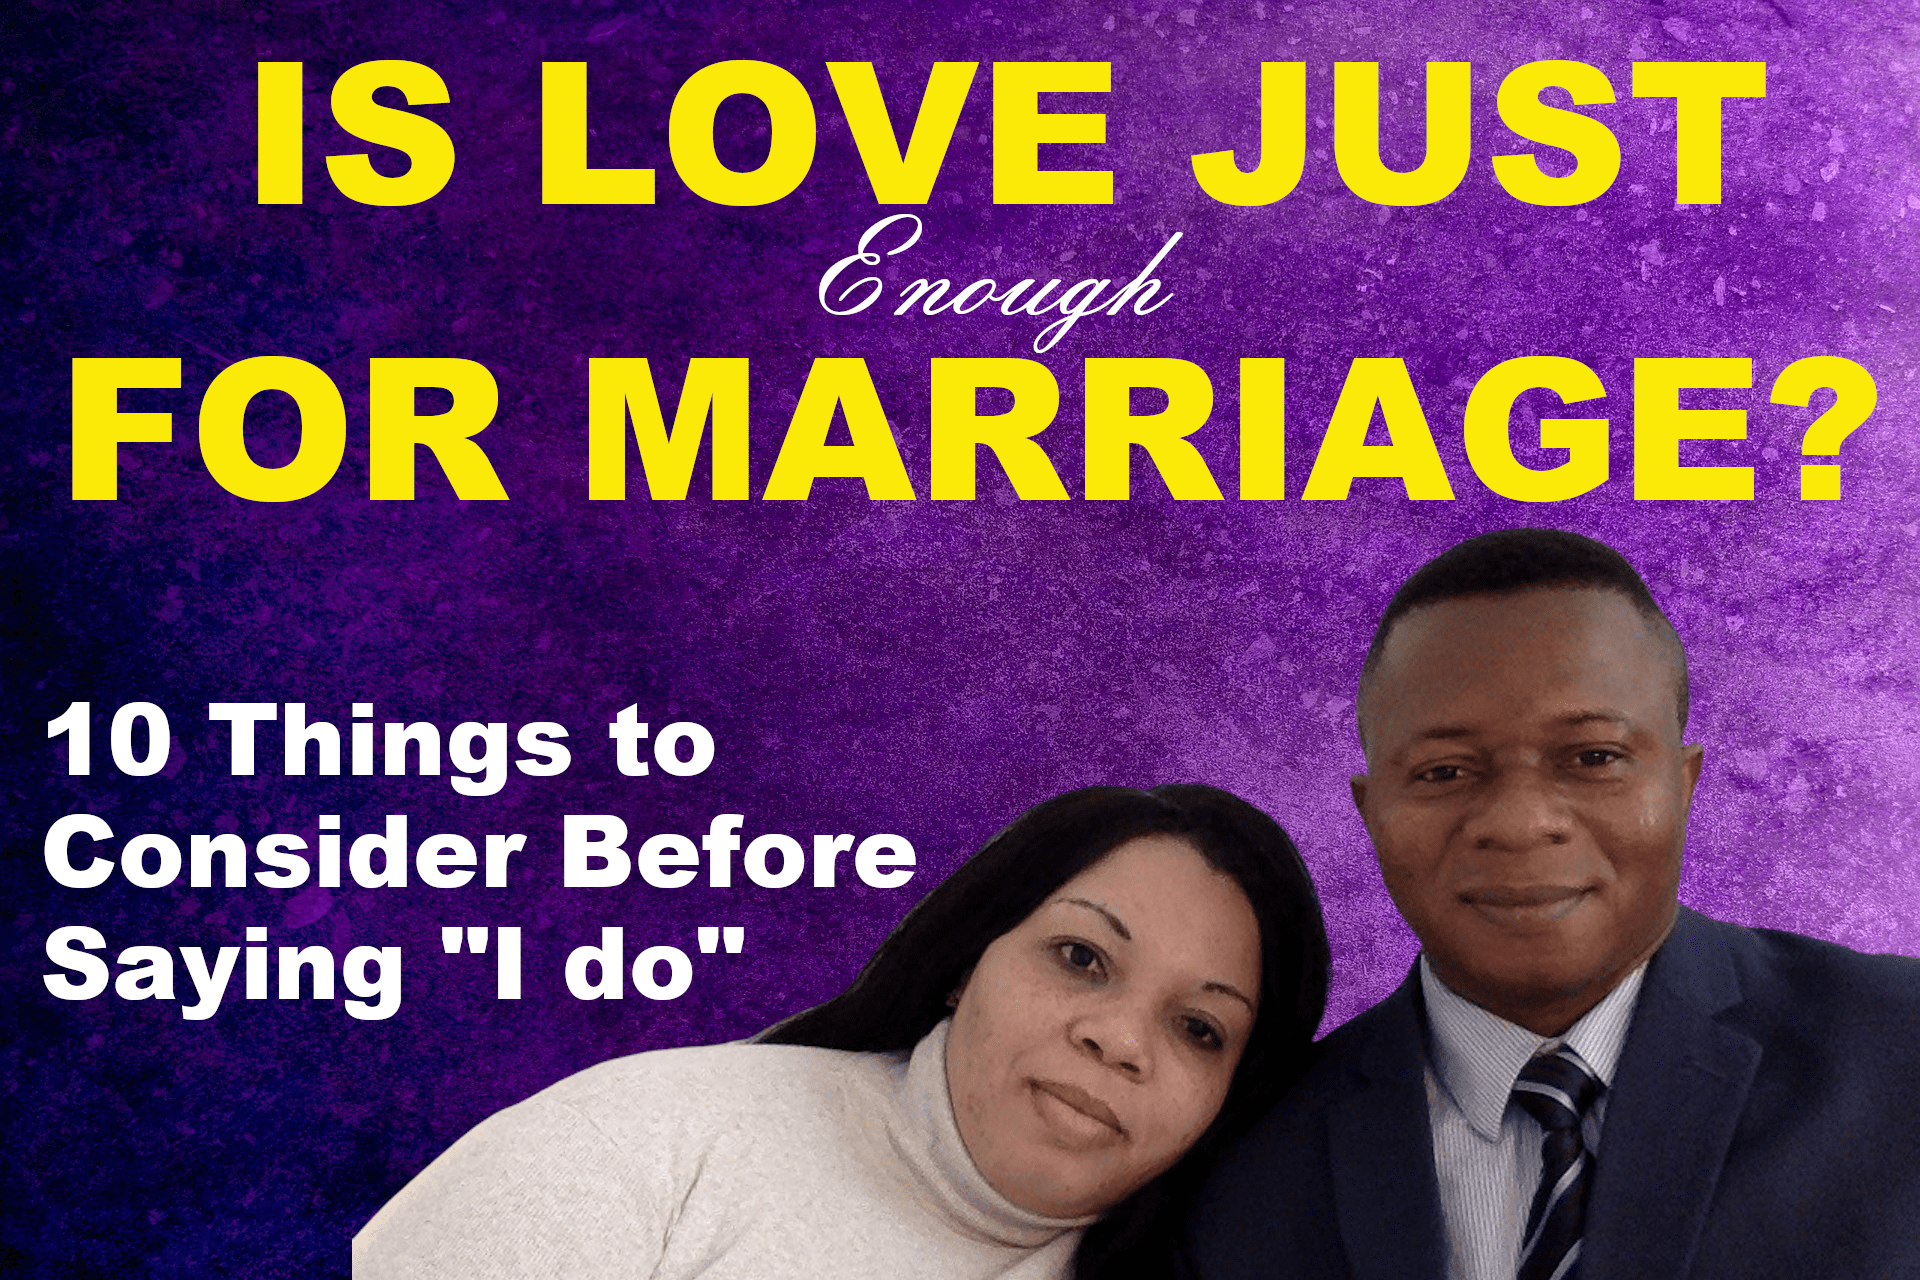 Is Love Just Enough For Marriage? - 10 Things to Consider Before Saying I Do